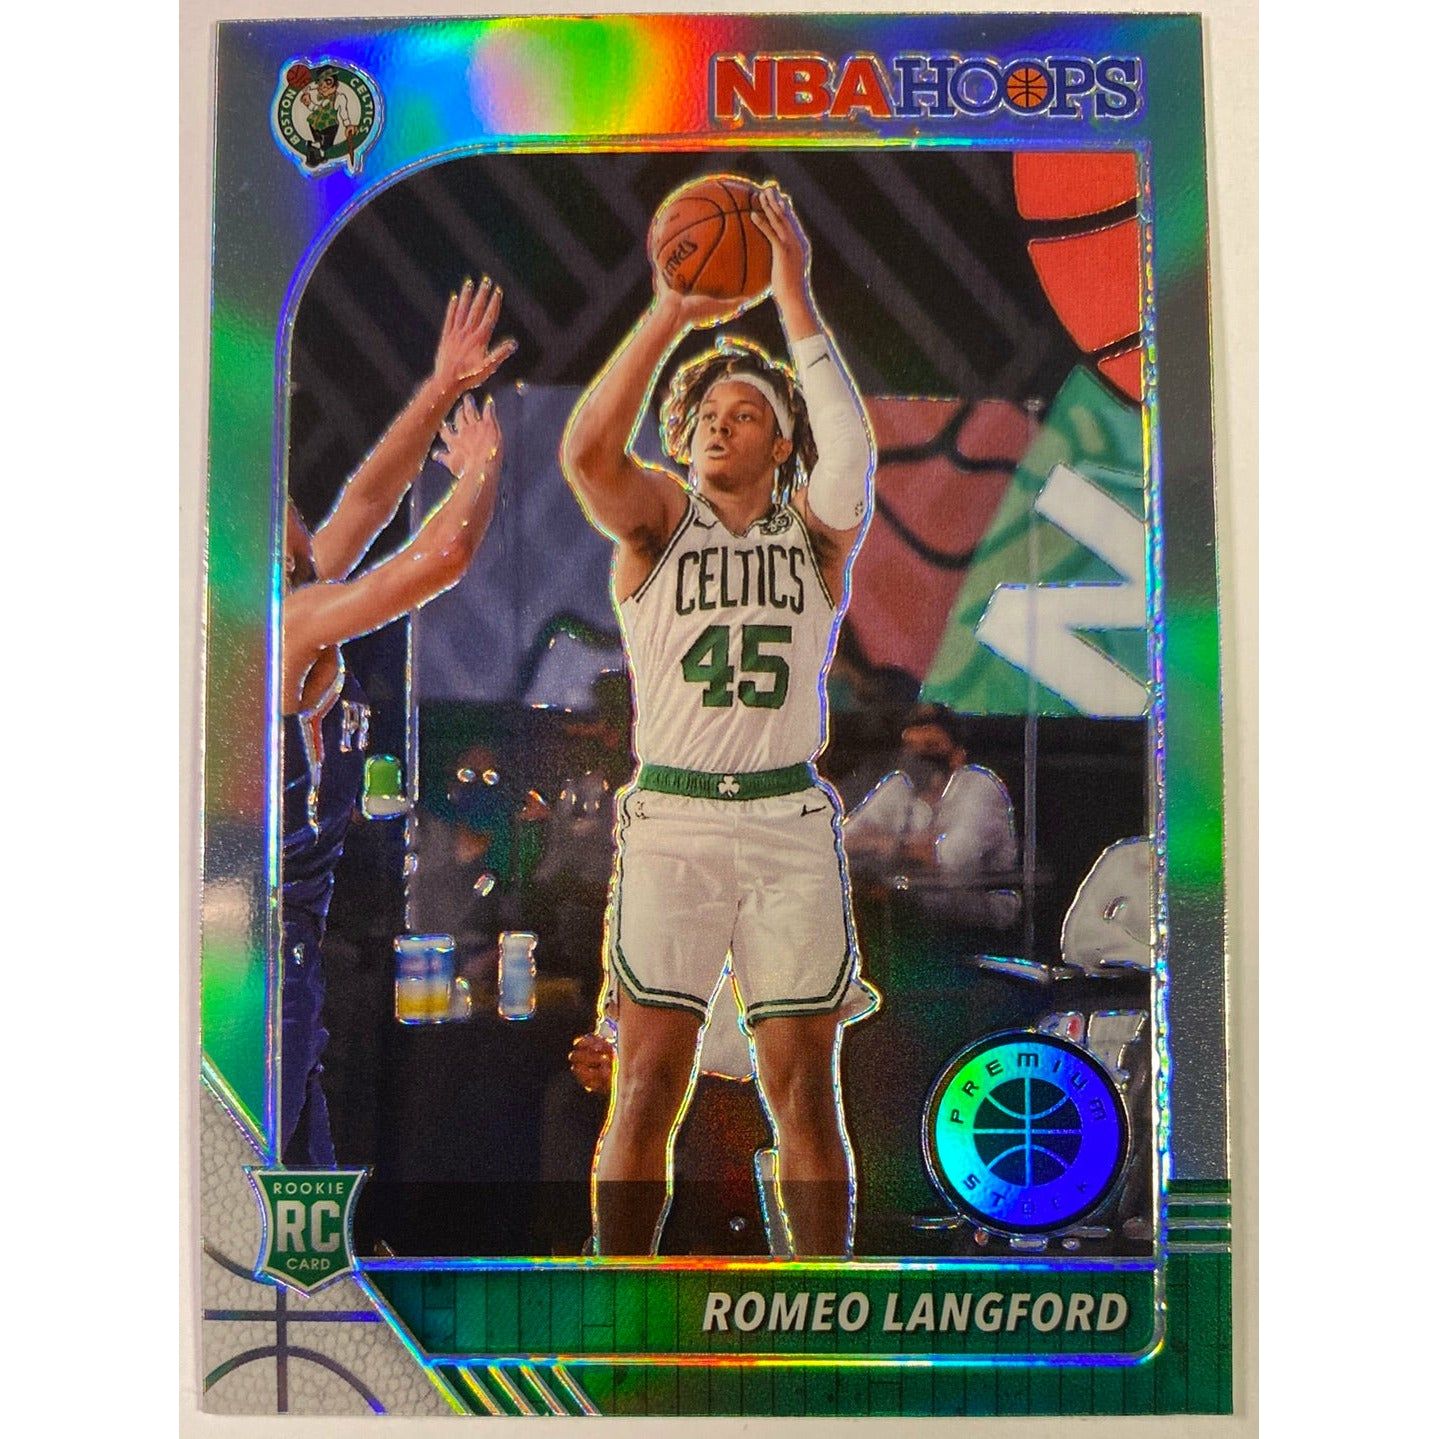  2019-20 Hoops Premium Stock Romeo Langford Silver Holo Prizm RC  Local Legends Cards & Collectibles